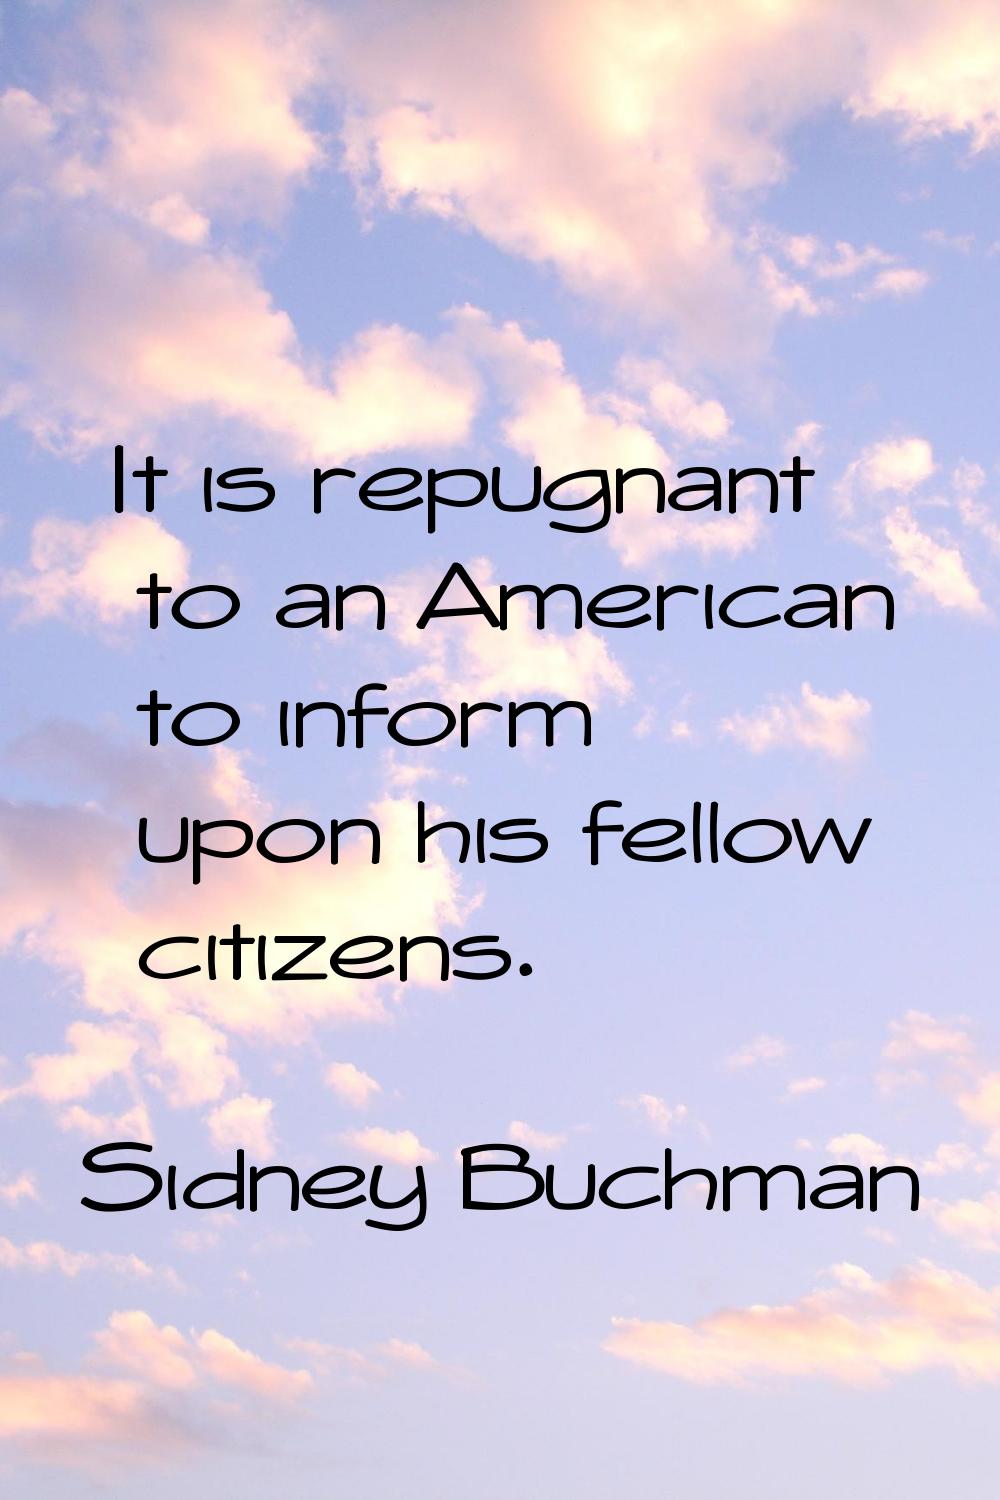 It is repugnant to an American to inform upon his fellow citizens.